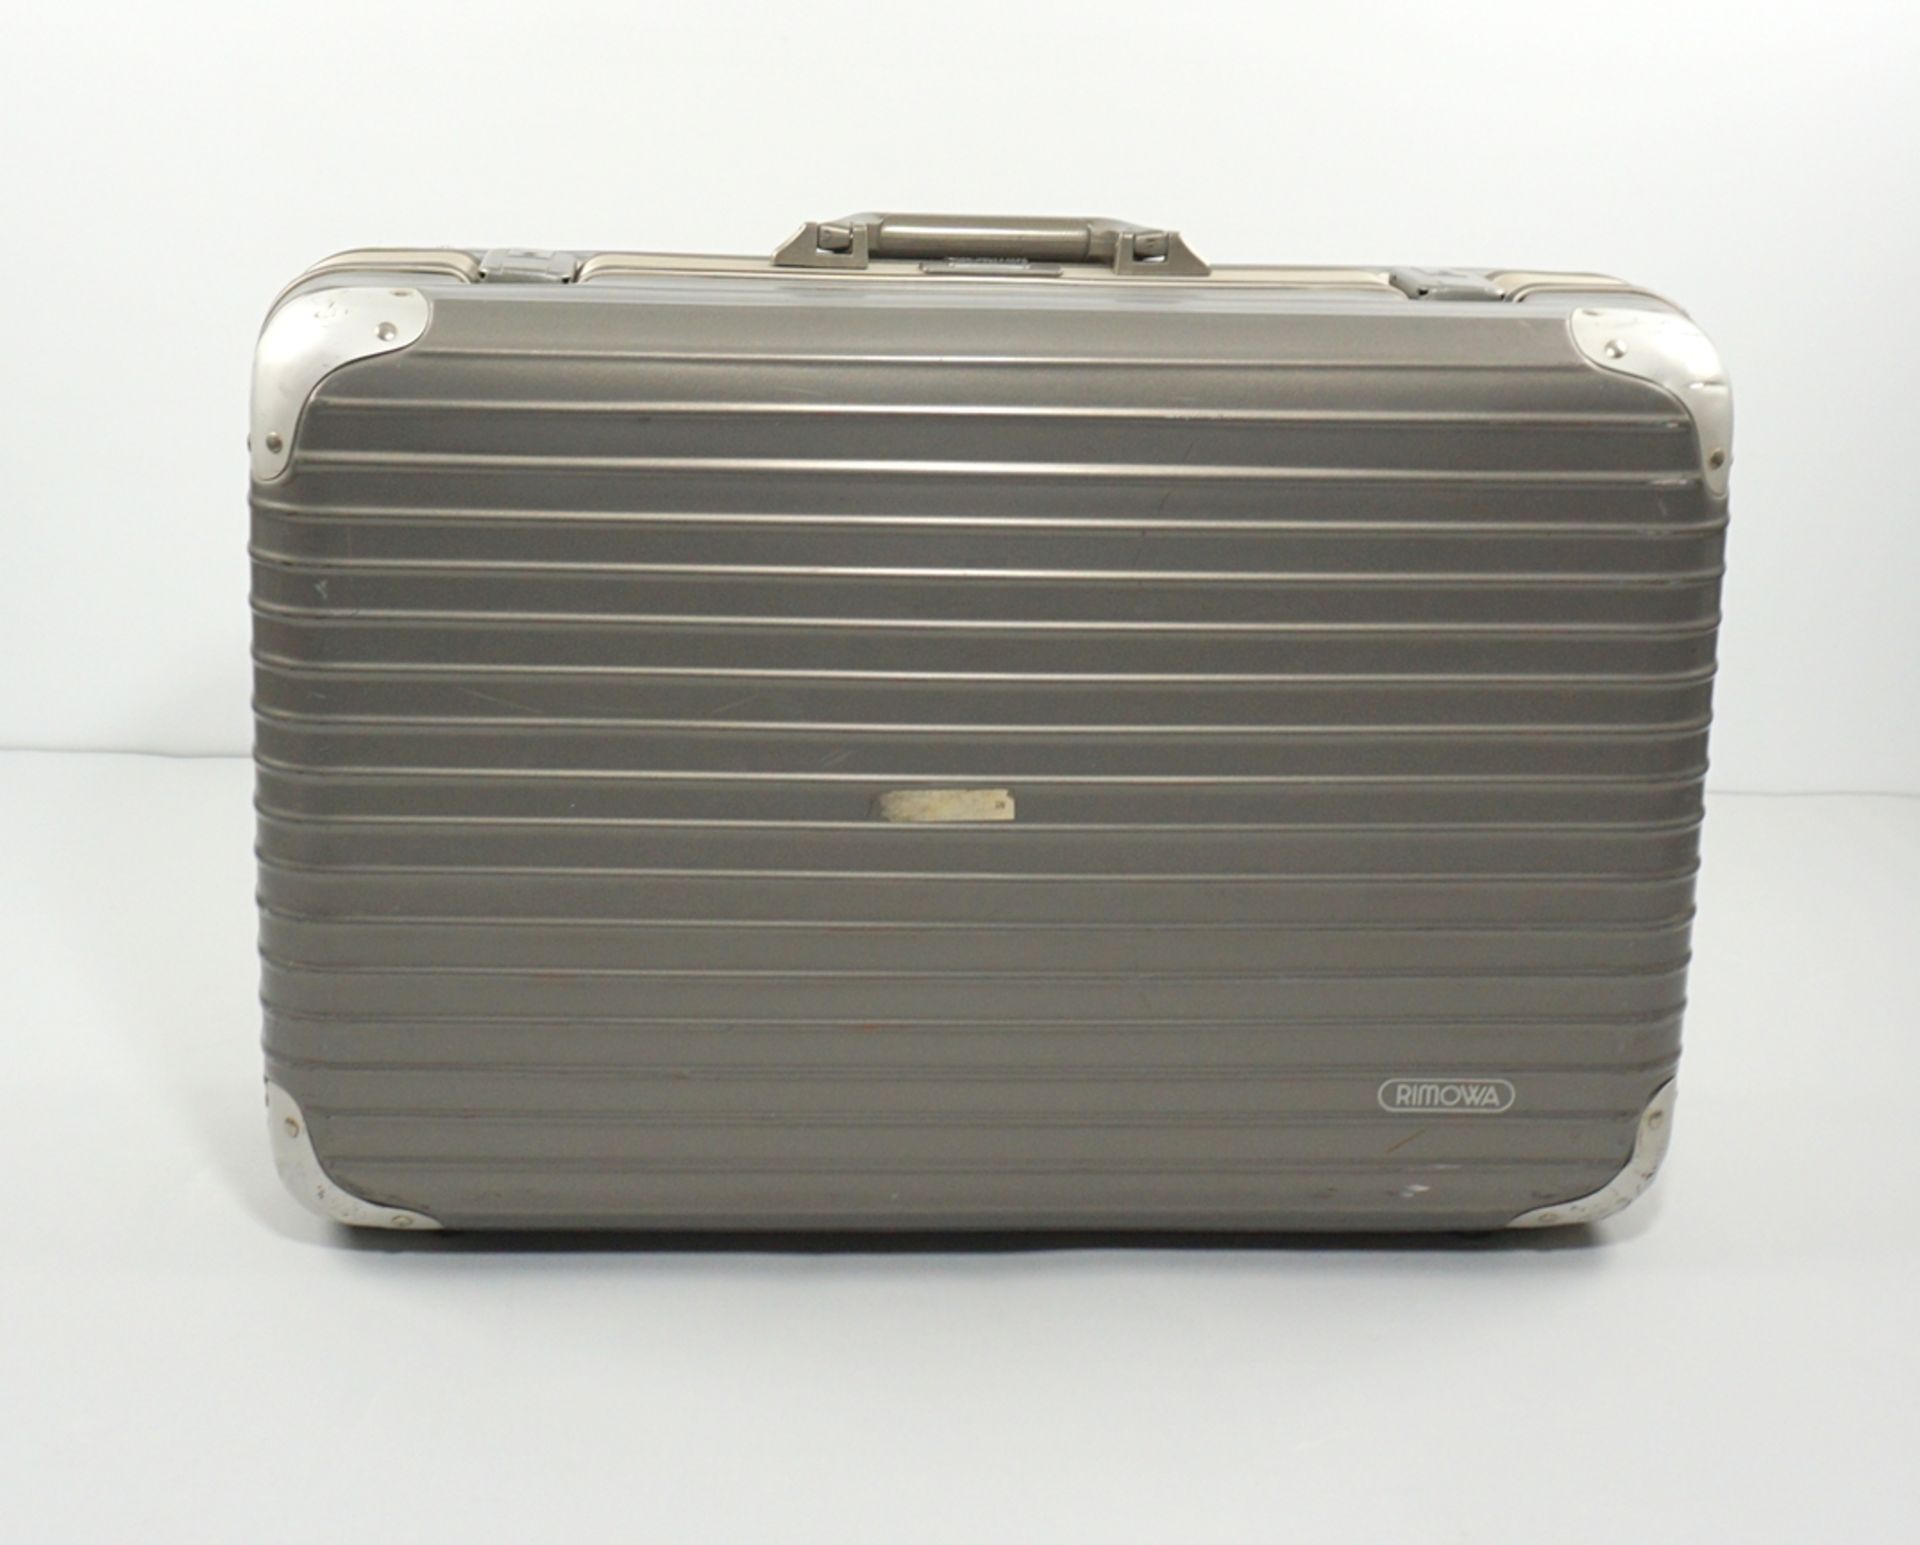 RIMOWA Handkoffer, Serie Colombo, Anfang 1990er Jahre - Image 2 of 5